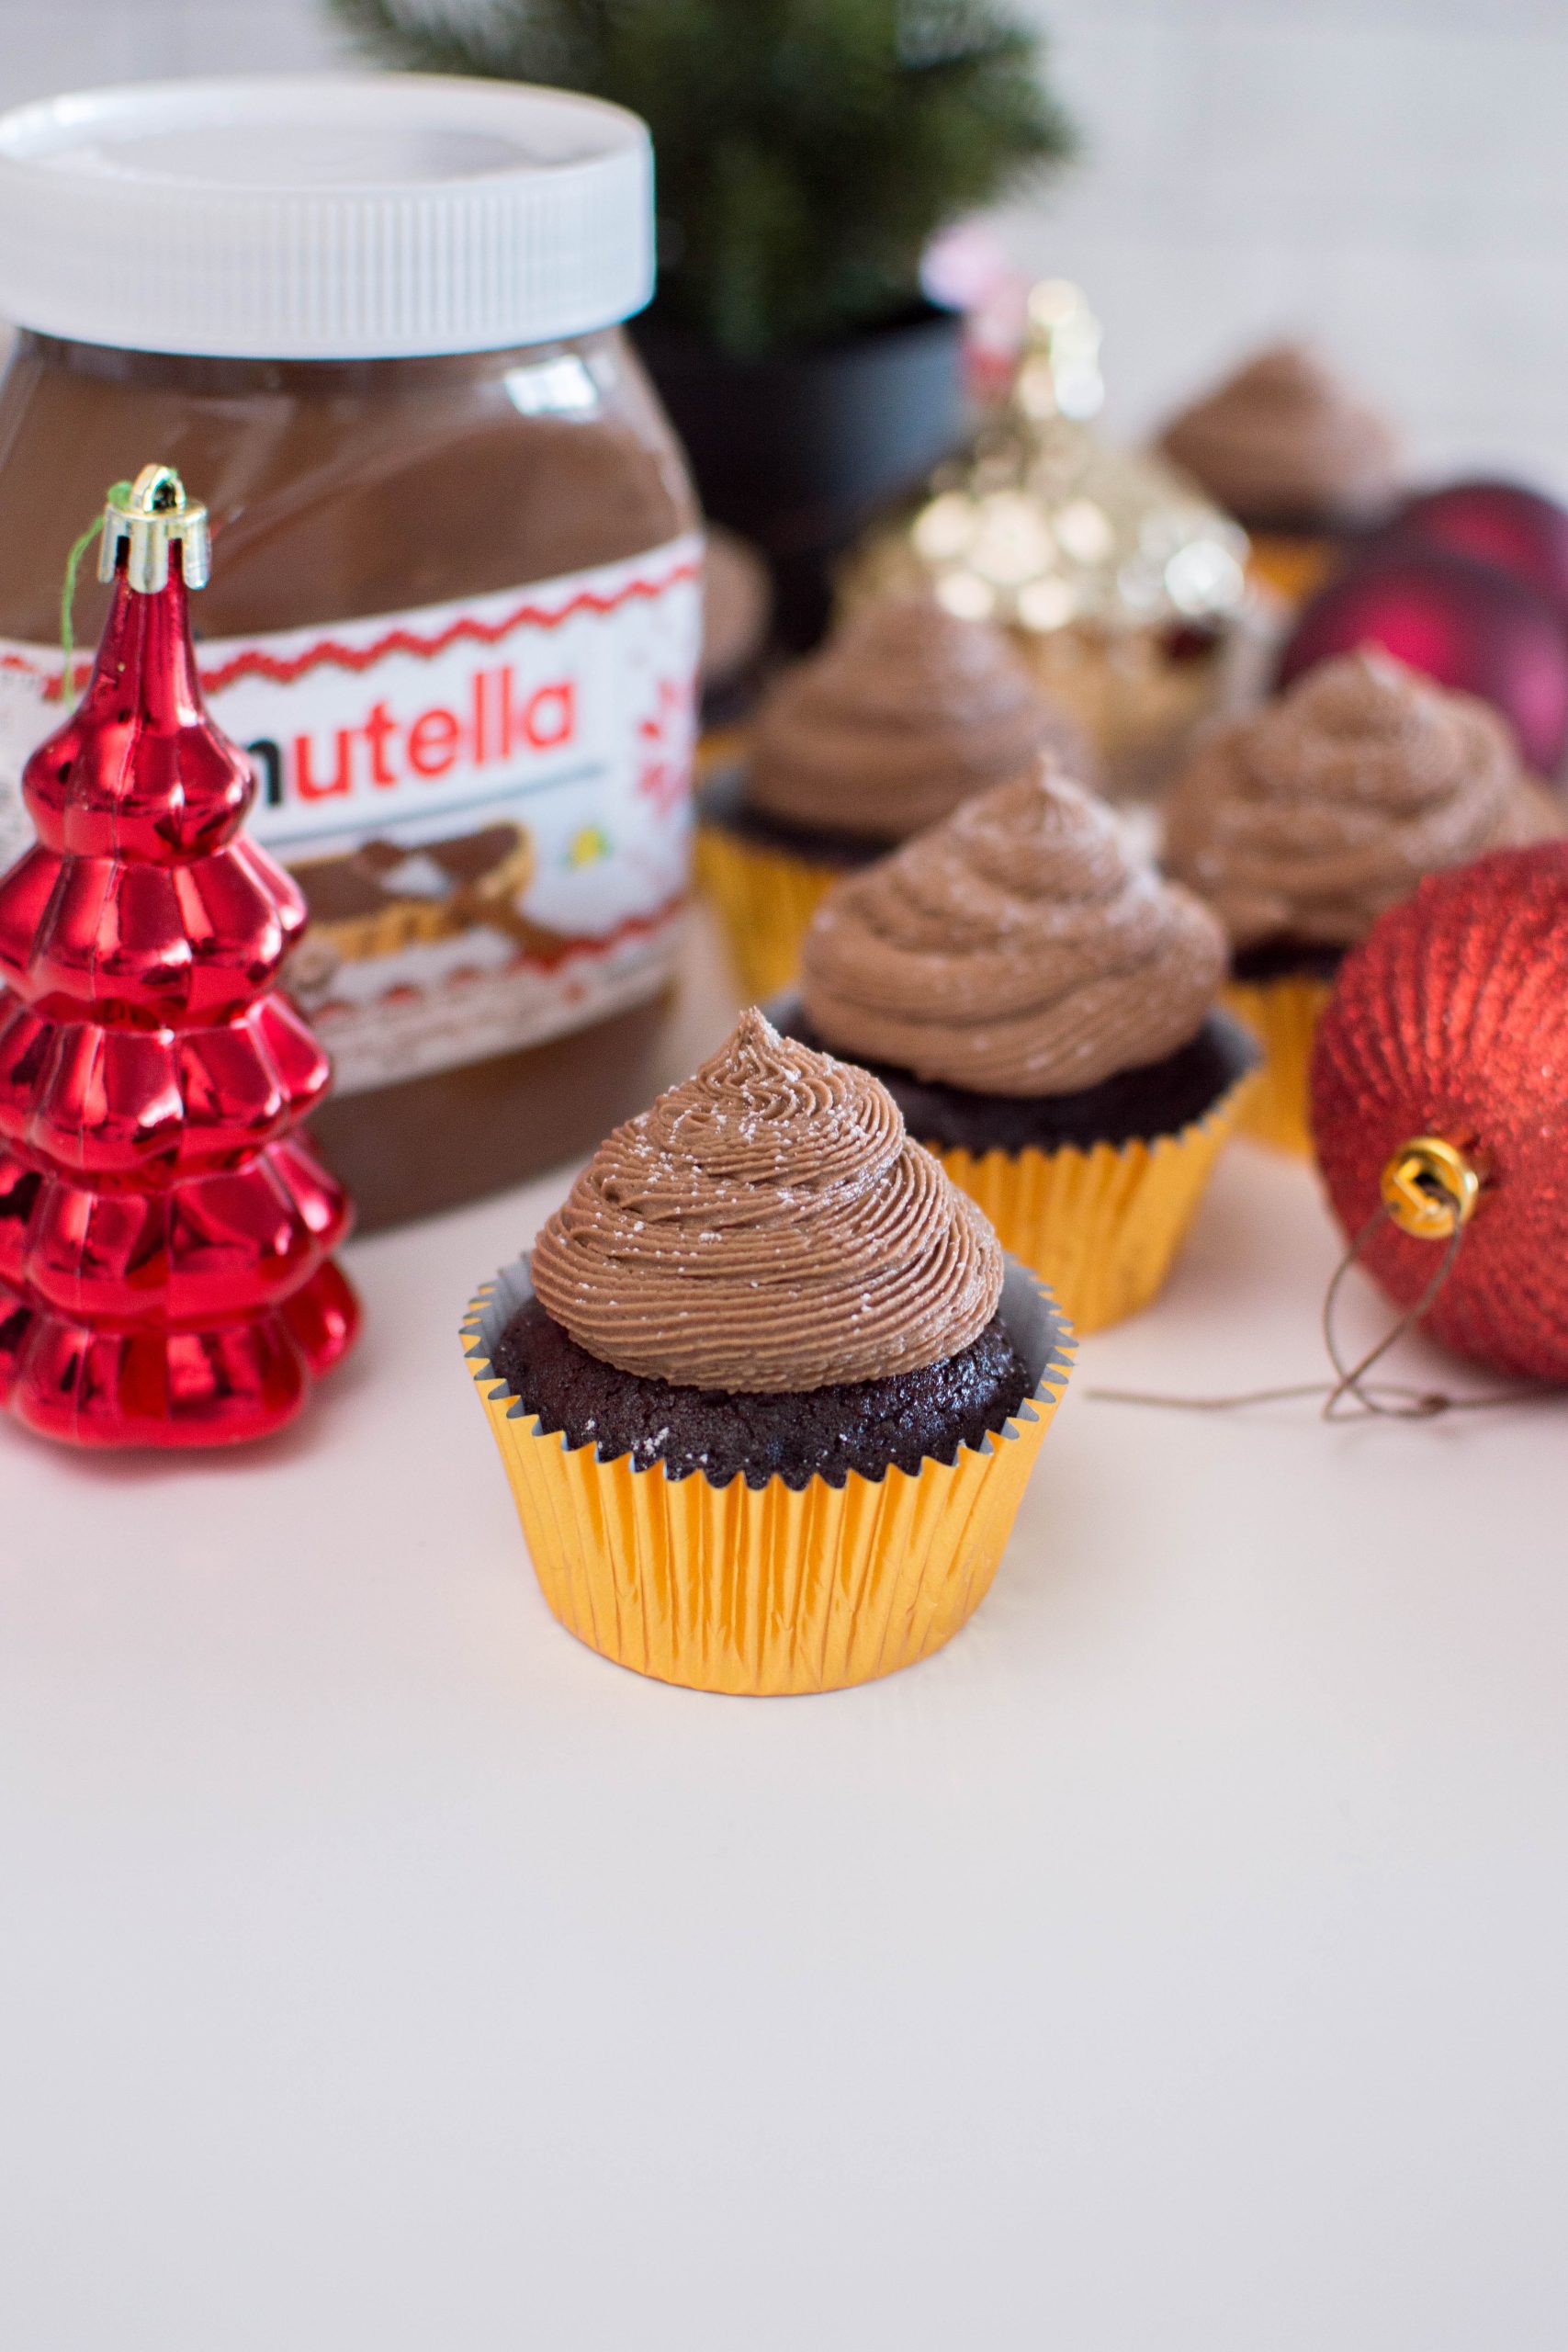 If you’re a Nutella fan, then trying out our homemade Nutella Buttercream is a MUST! Super chocolate, super nutty… step-up your cupcake game by topping it with this amazing recipe!